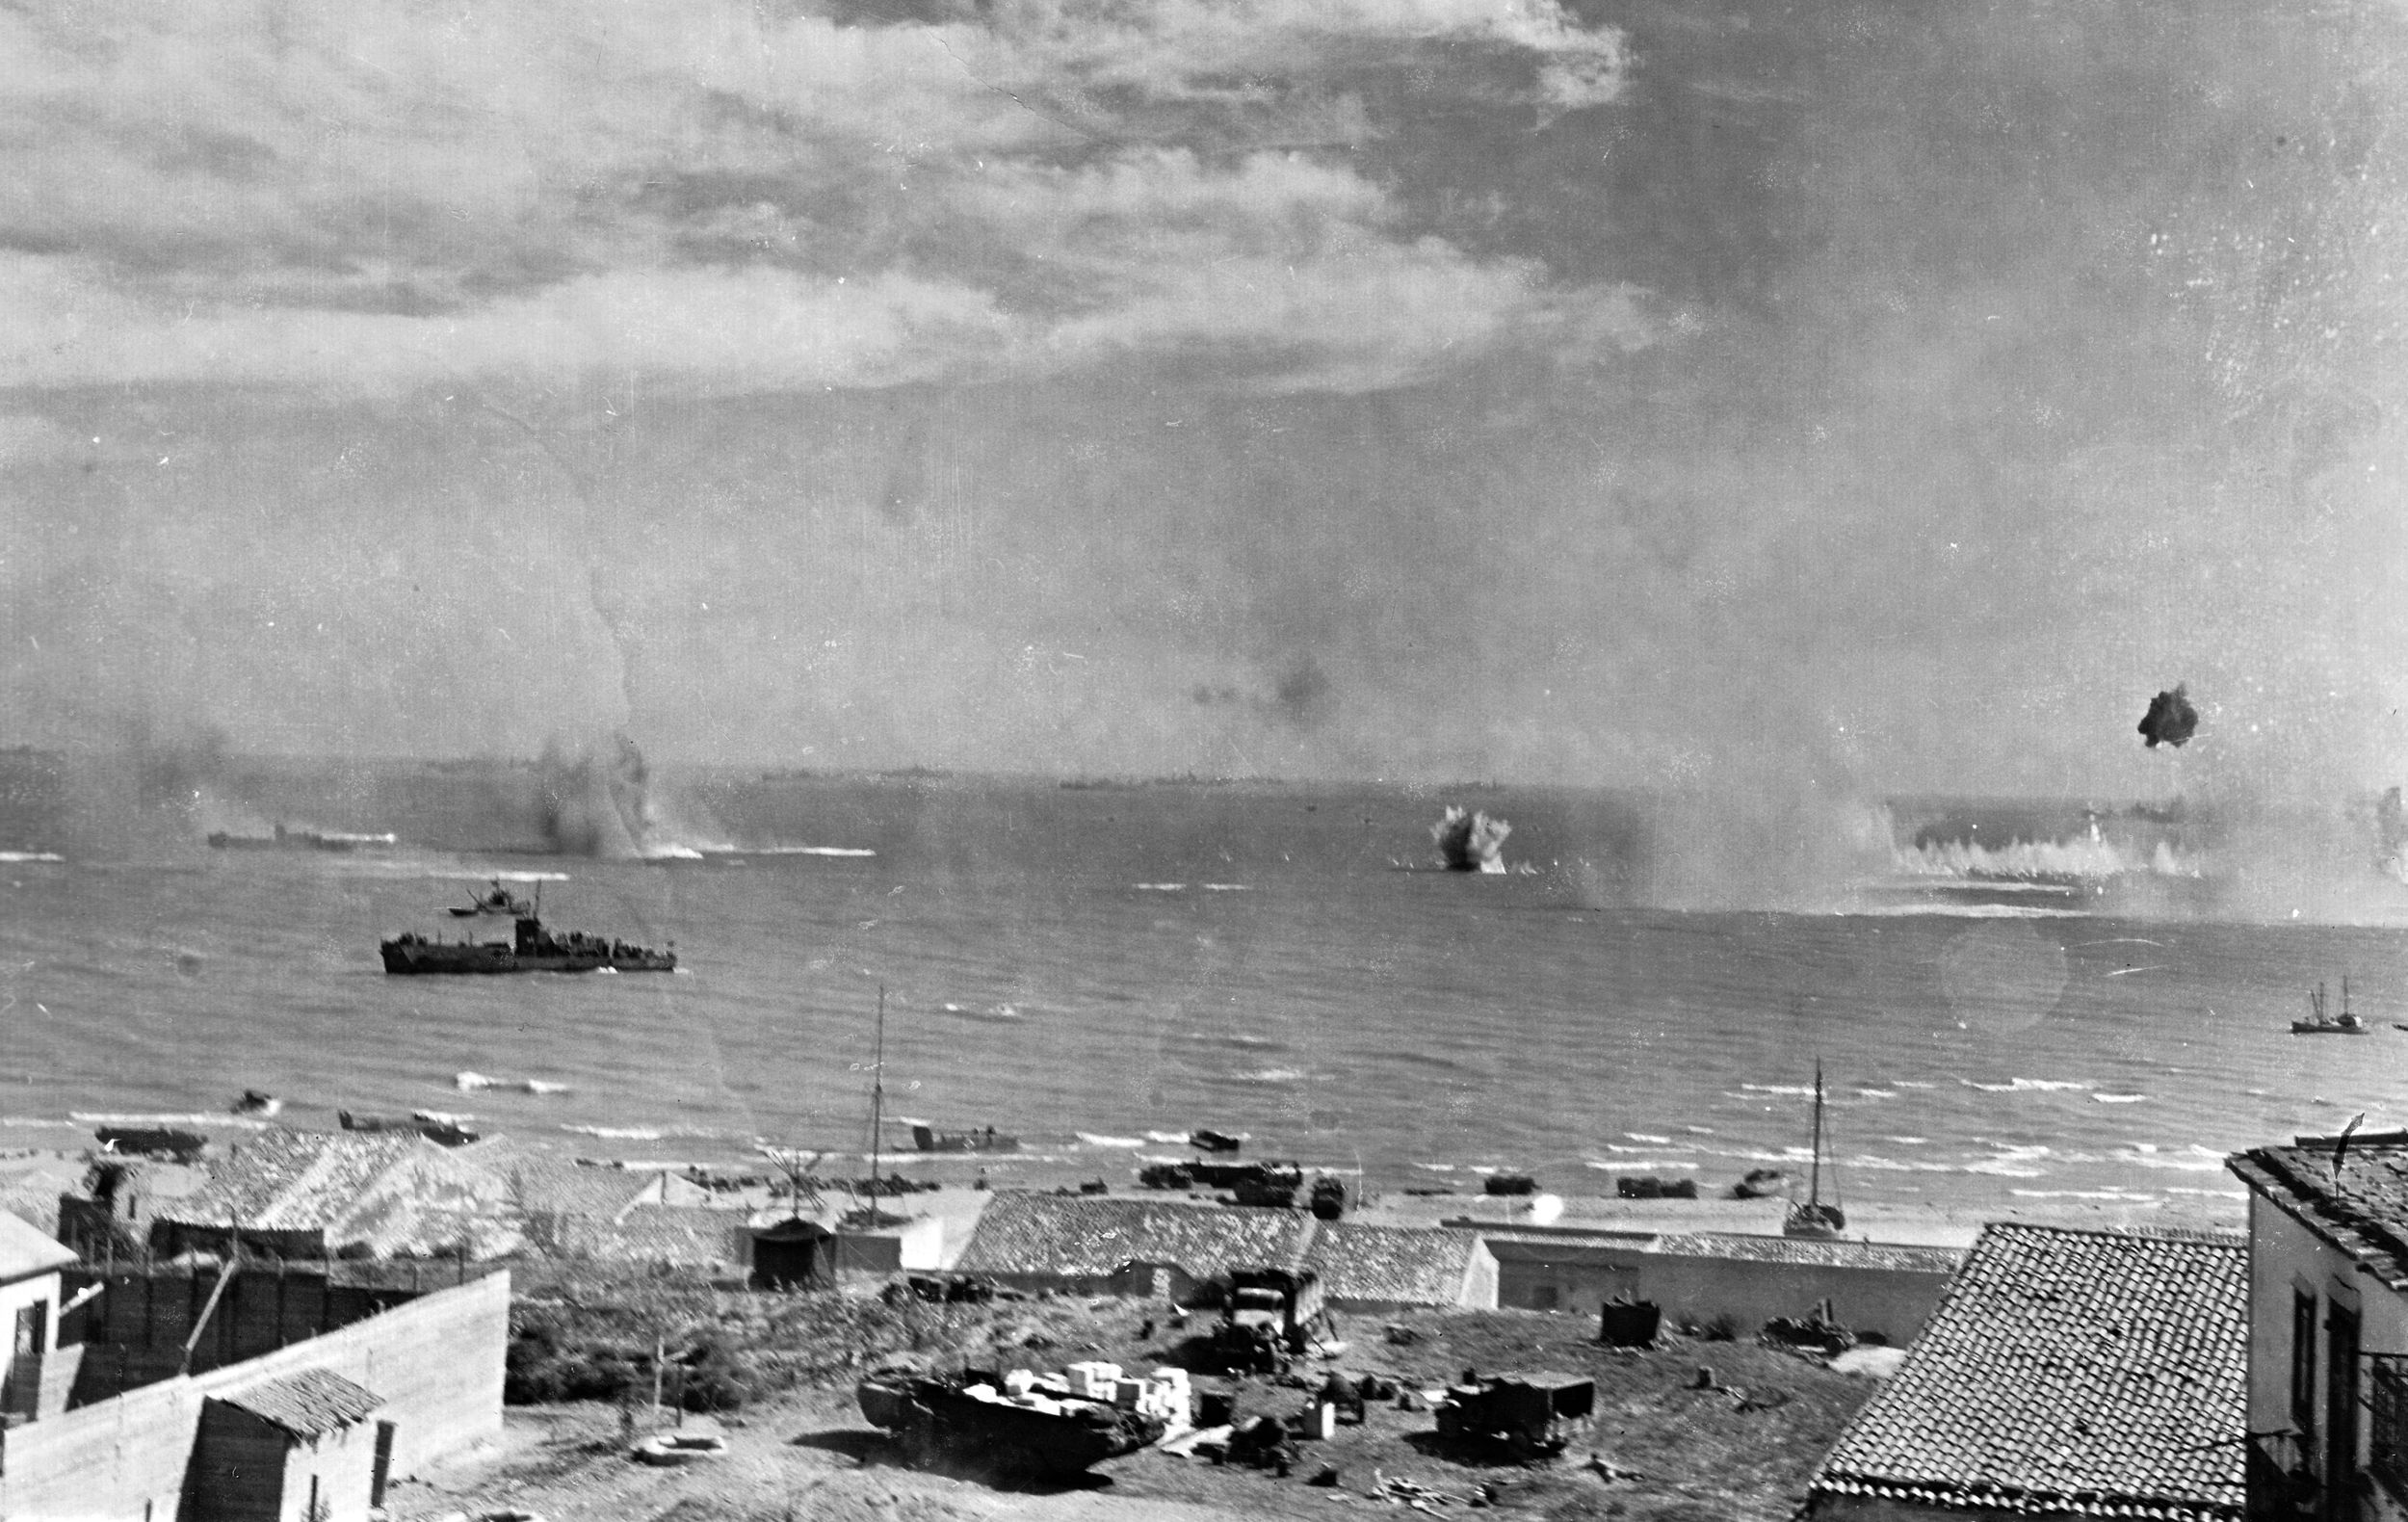 American ships come under aerial attack from German bombers off the coast of the southeastern city of Gela, where the U.S. 1st Infantry Division came ashore on July 10, 1943.